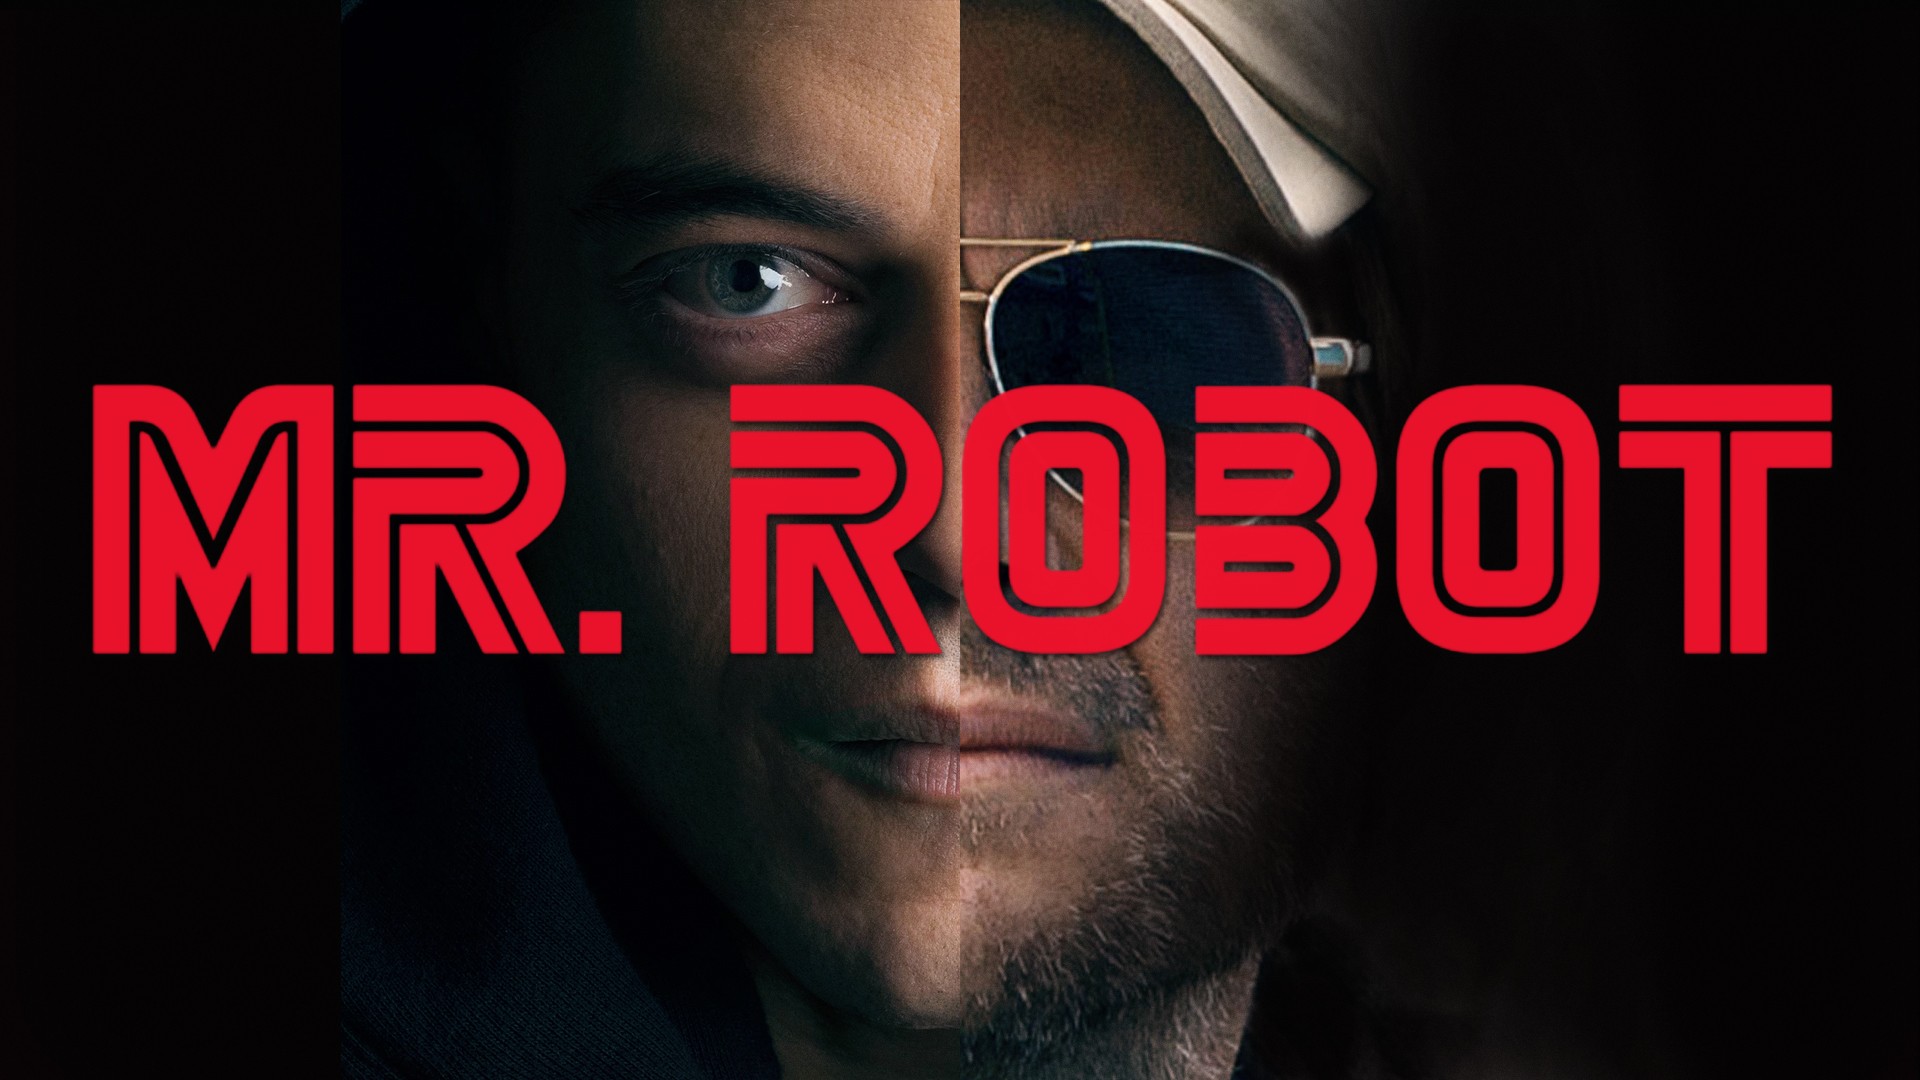 Mr Robot Logo Wallpaper,HD Tv Shows Wallpapers,4k Wallpapers,Images, Backgrounds,Photos and Pictures